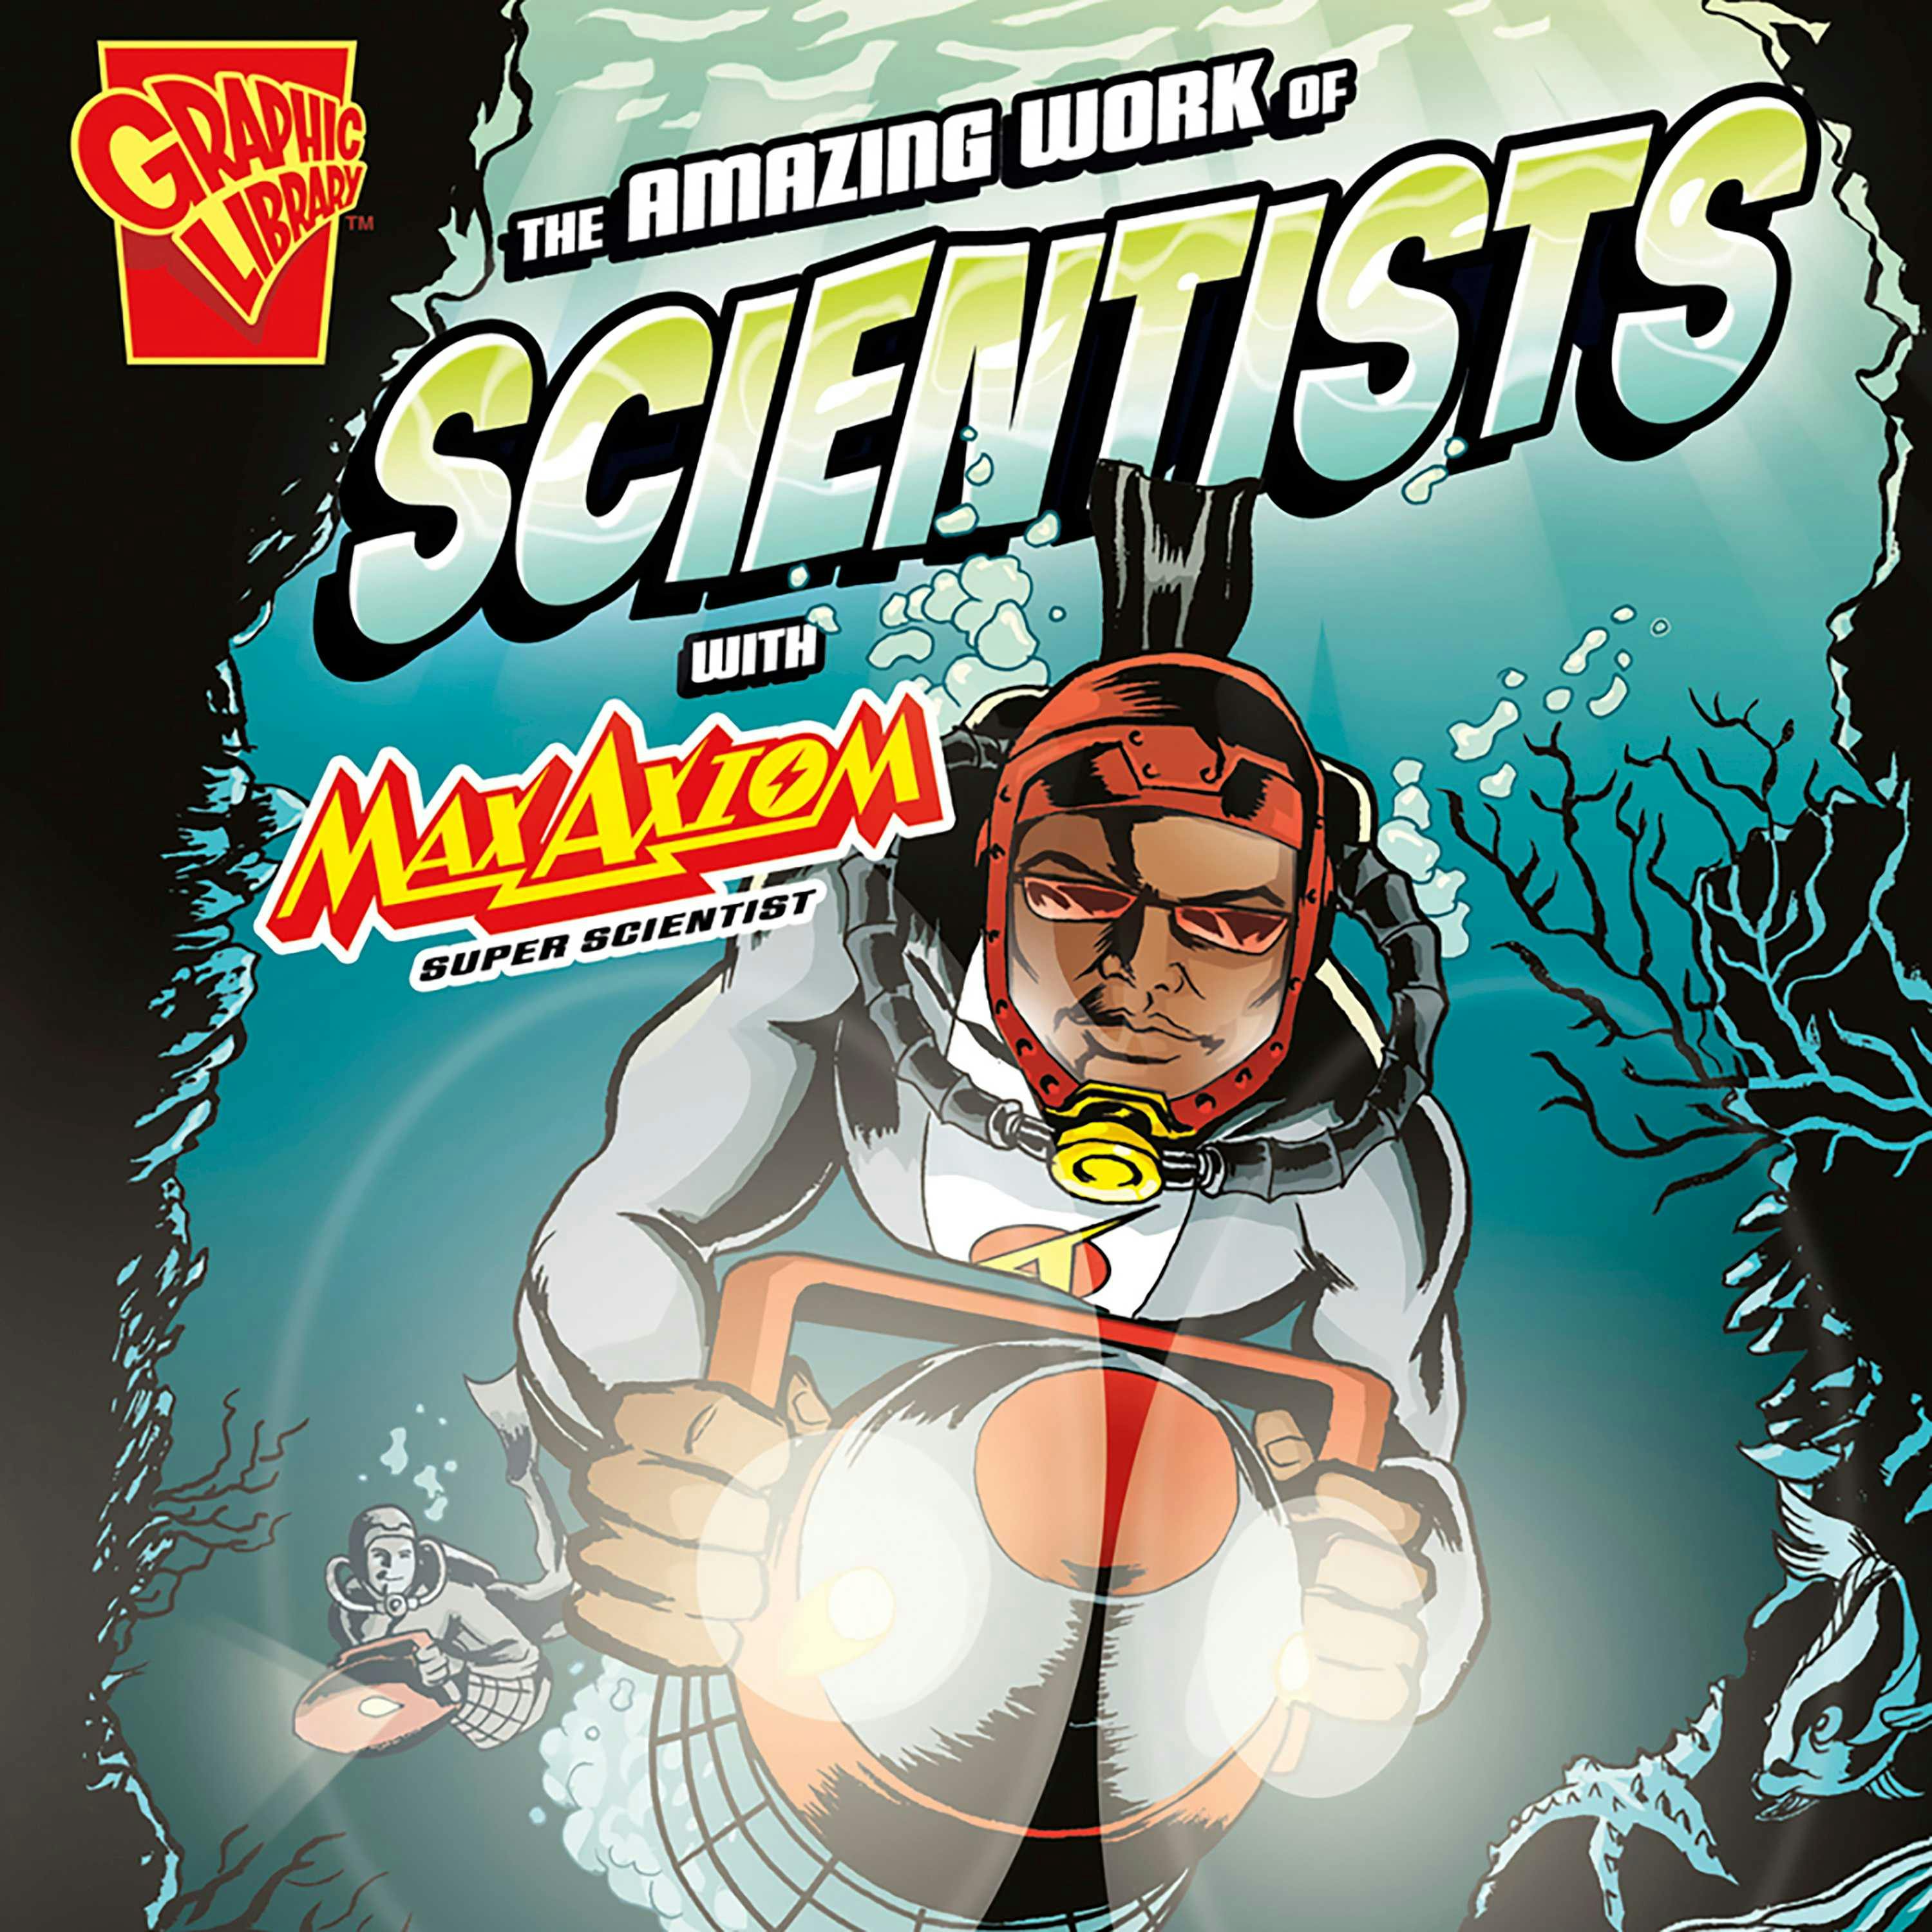 The Amazing Work of Scientists with Max Axiom, Super Scientist - Agnieszka Biskup